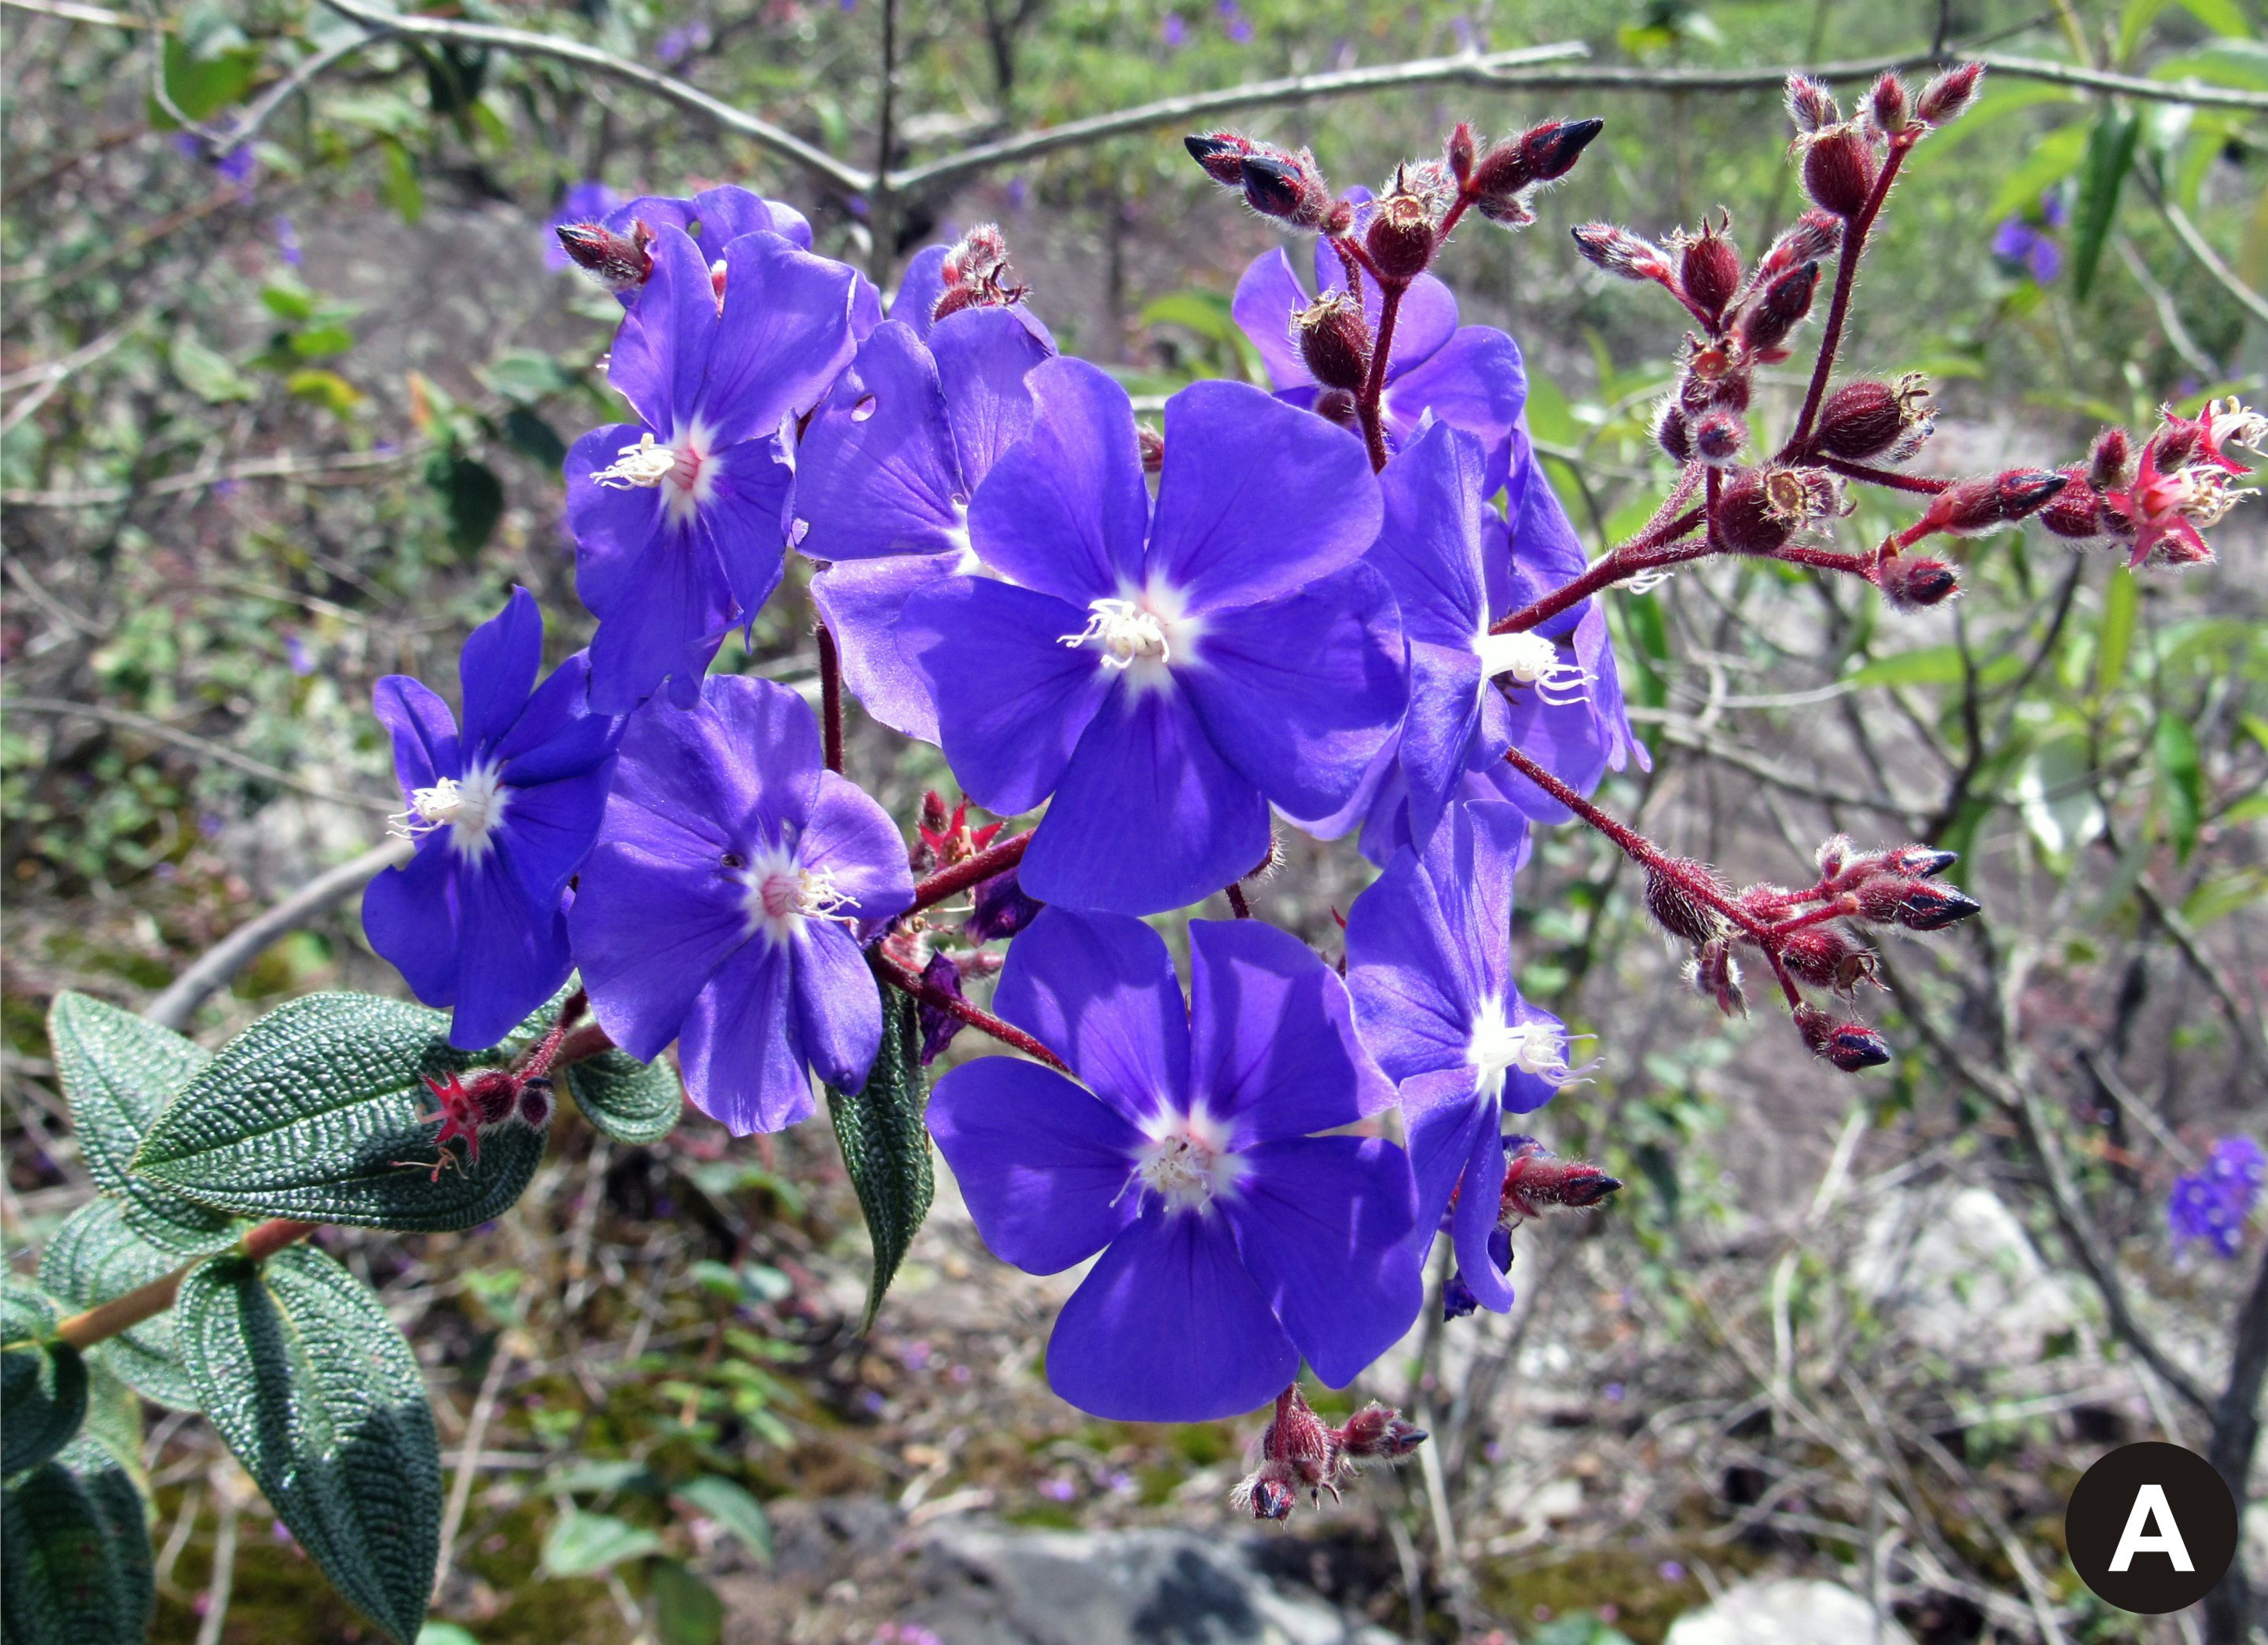 A photograph of Pleroma caetanoi in the field with purple petals